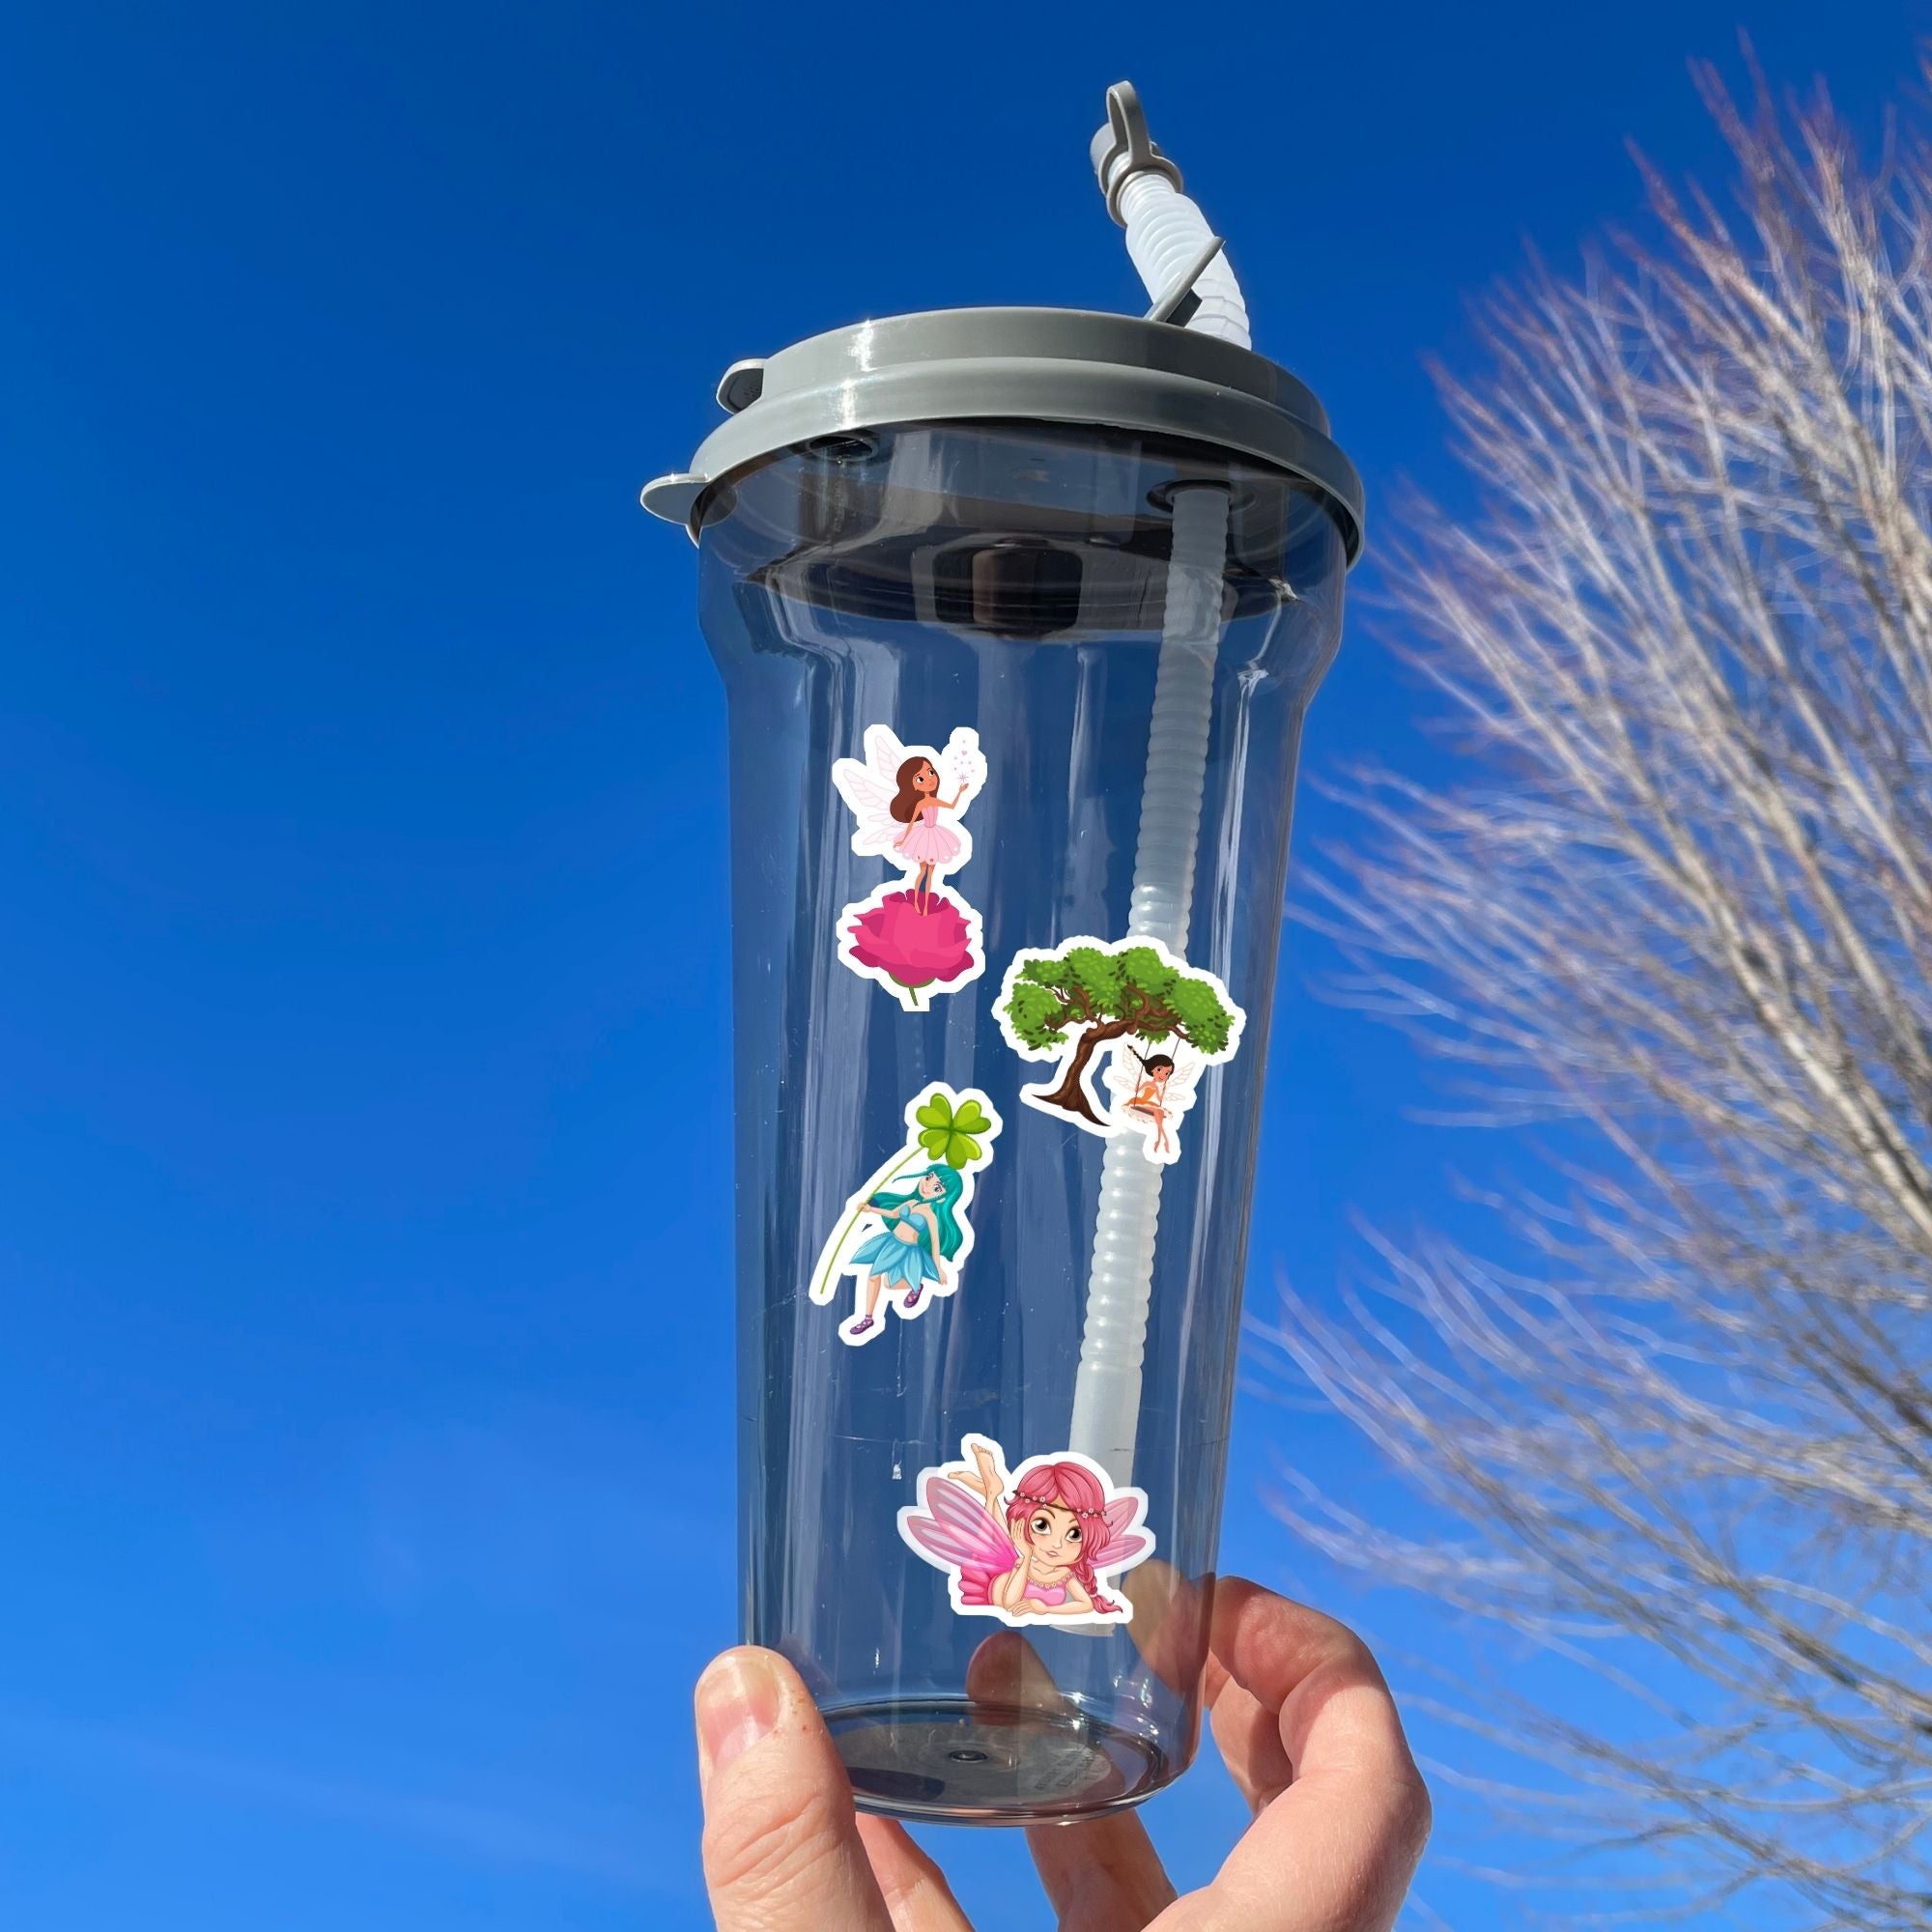 This sticker sheet has 20 different sticker images of fairies and it features a holographic sparkle overlay to give it that magical feel. This image shows a water bottle with stickers of a fairy standing on a pink rose, a fairy on a swing below a big tree, a fairy with a four leaf clover, and a fairy leaning on her elbows with her feet crossed, applied to it.